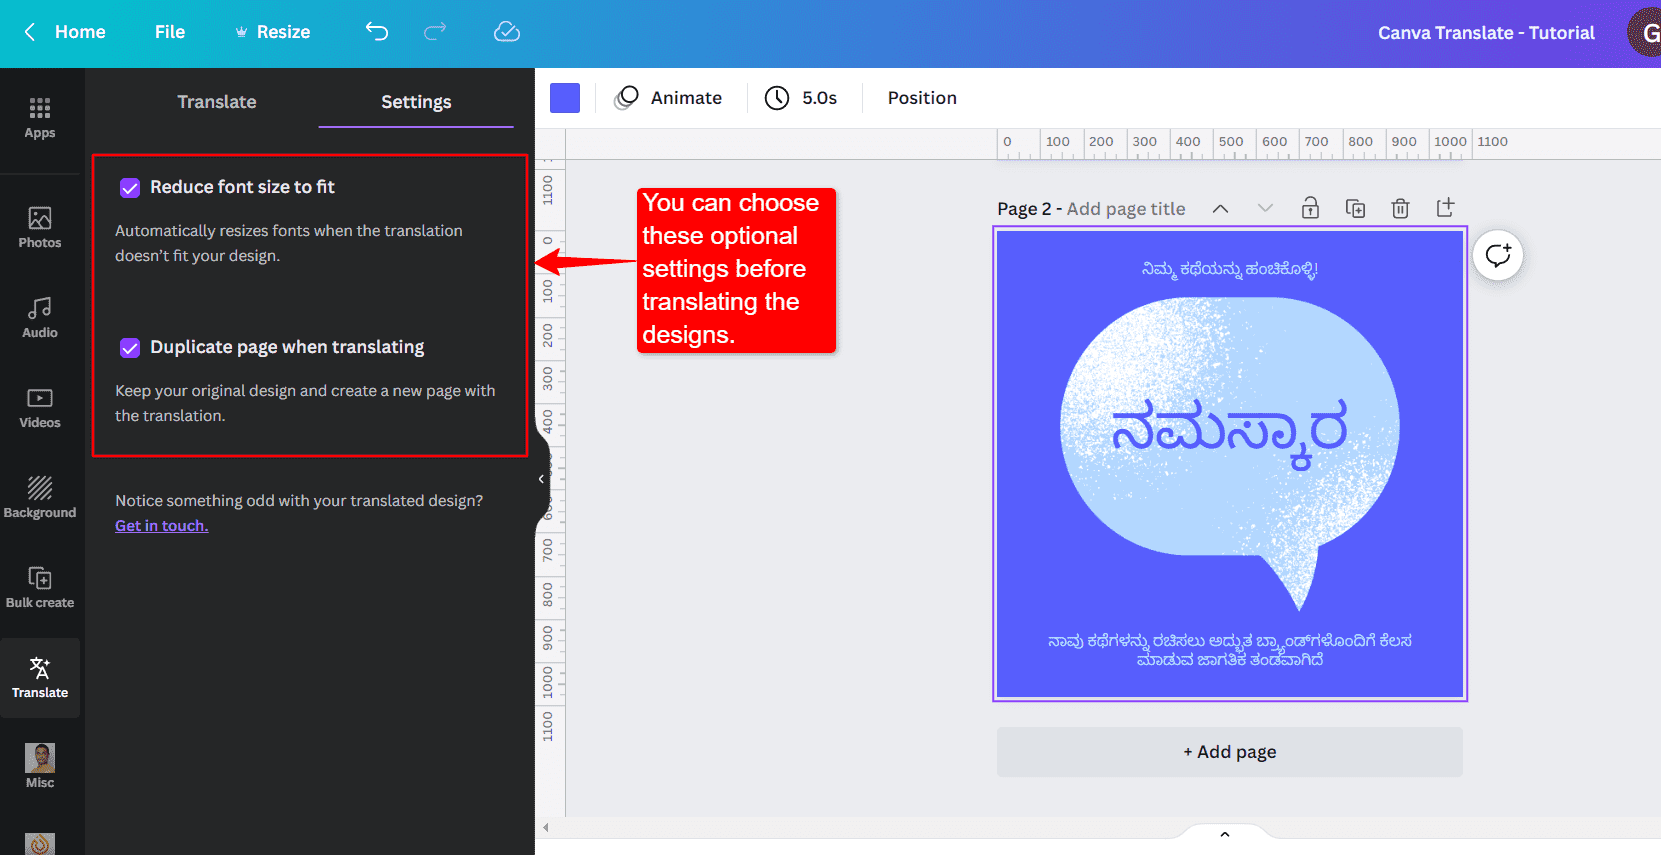 Canva Translate Feature Overview